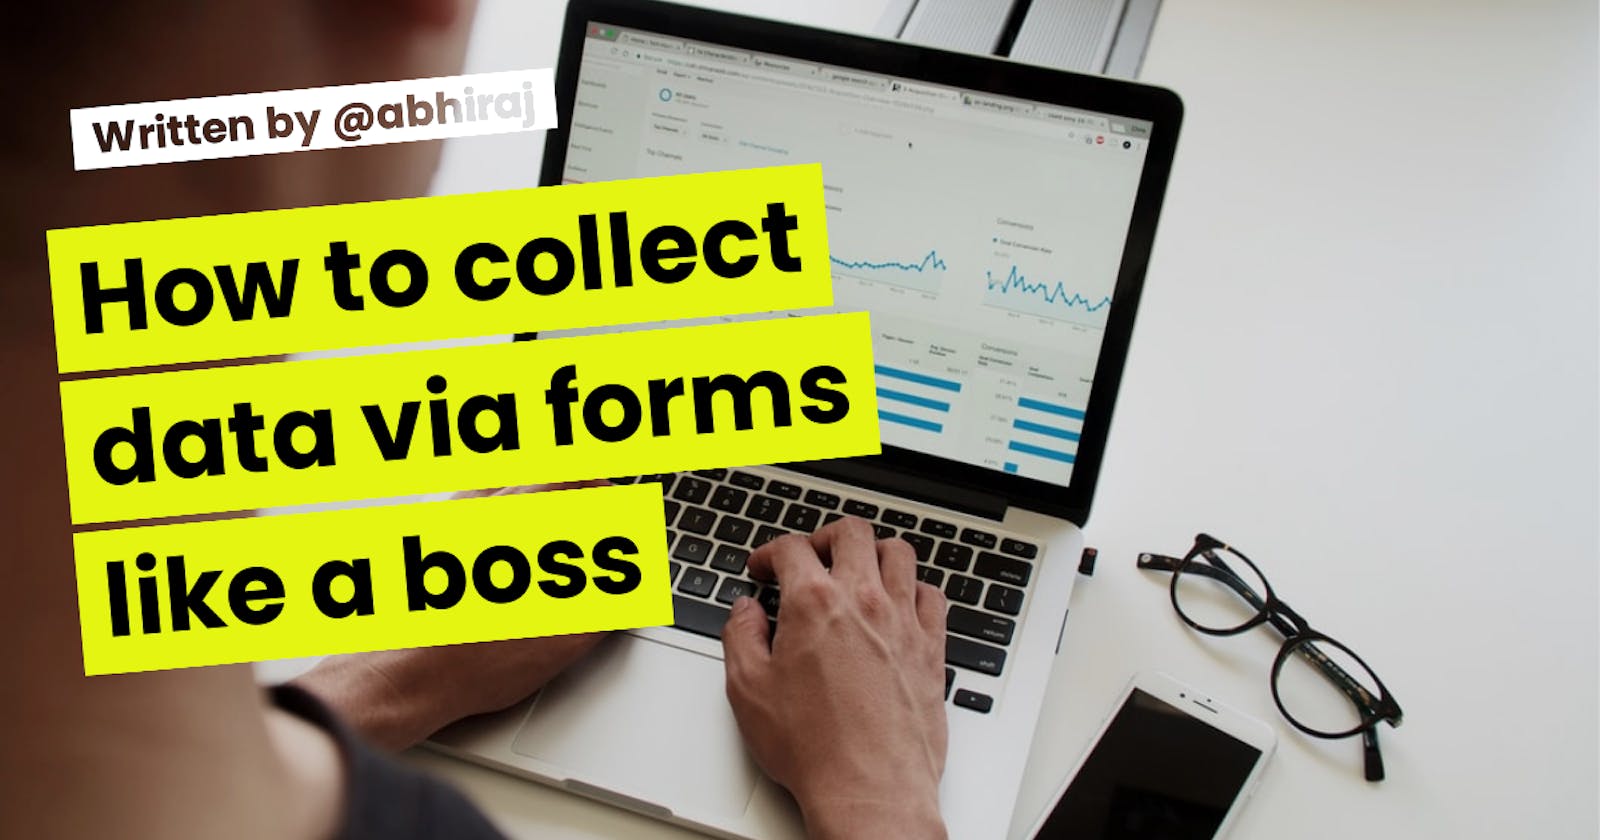 How to collect data via forms like a boss